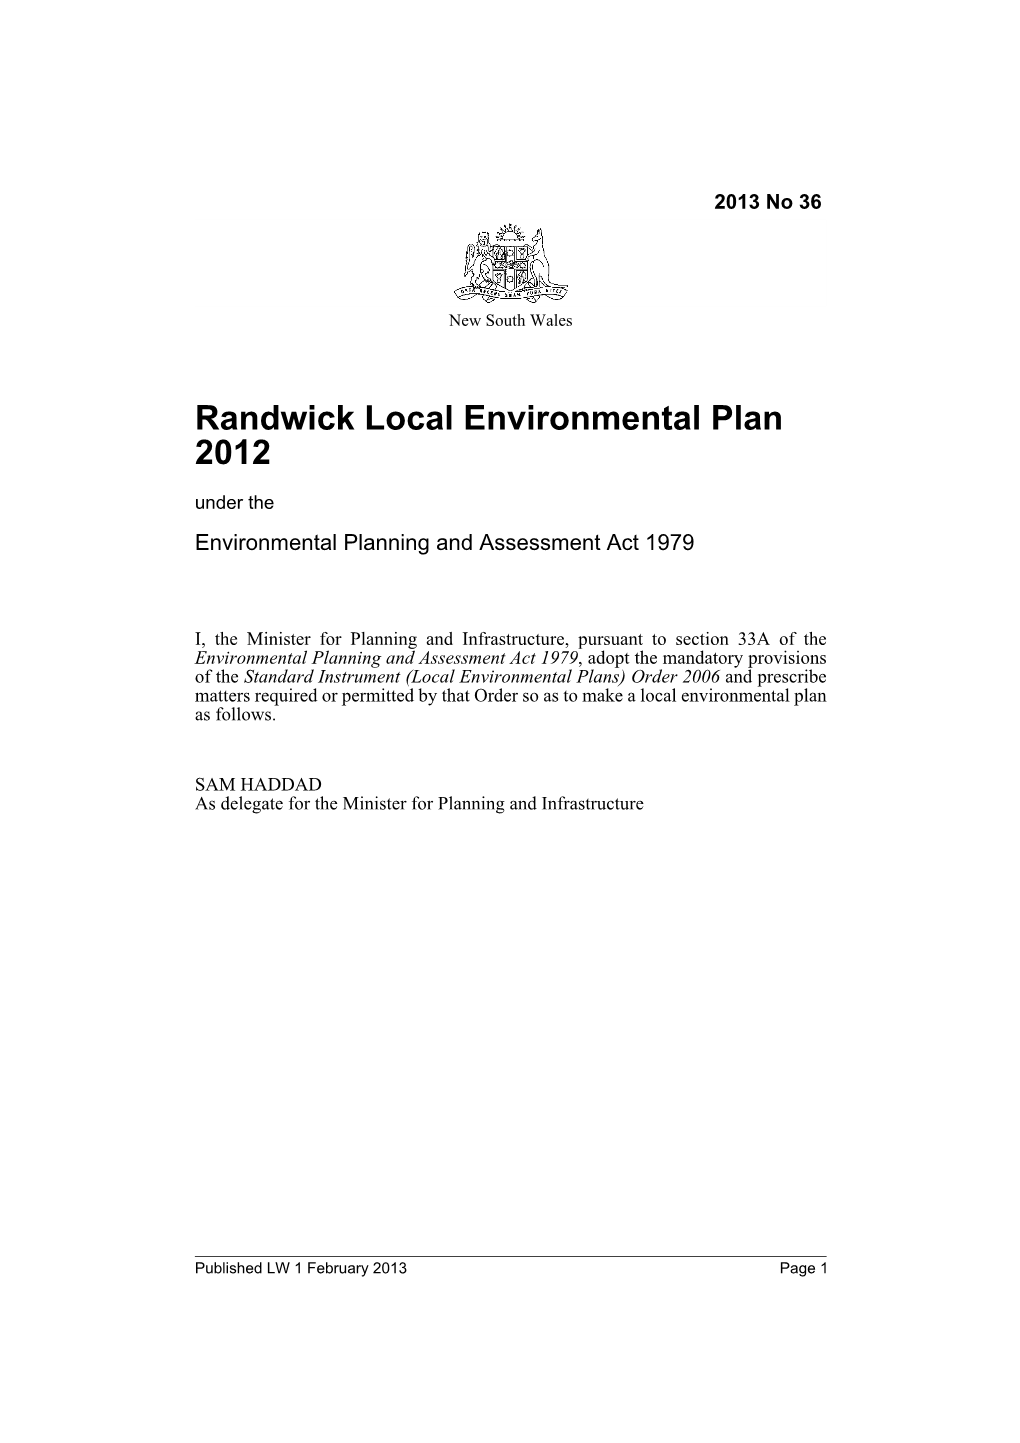 Randwick Local Environmental Plan 2012 Under the Environmental Planning and Assessment Act 1979